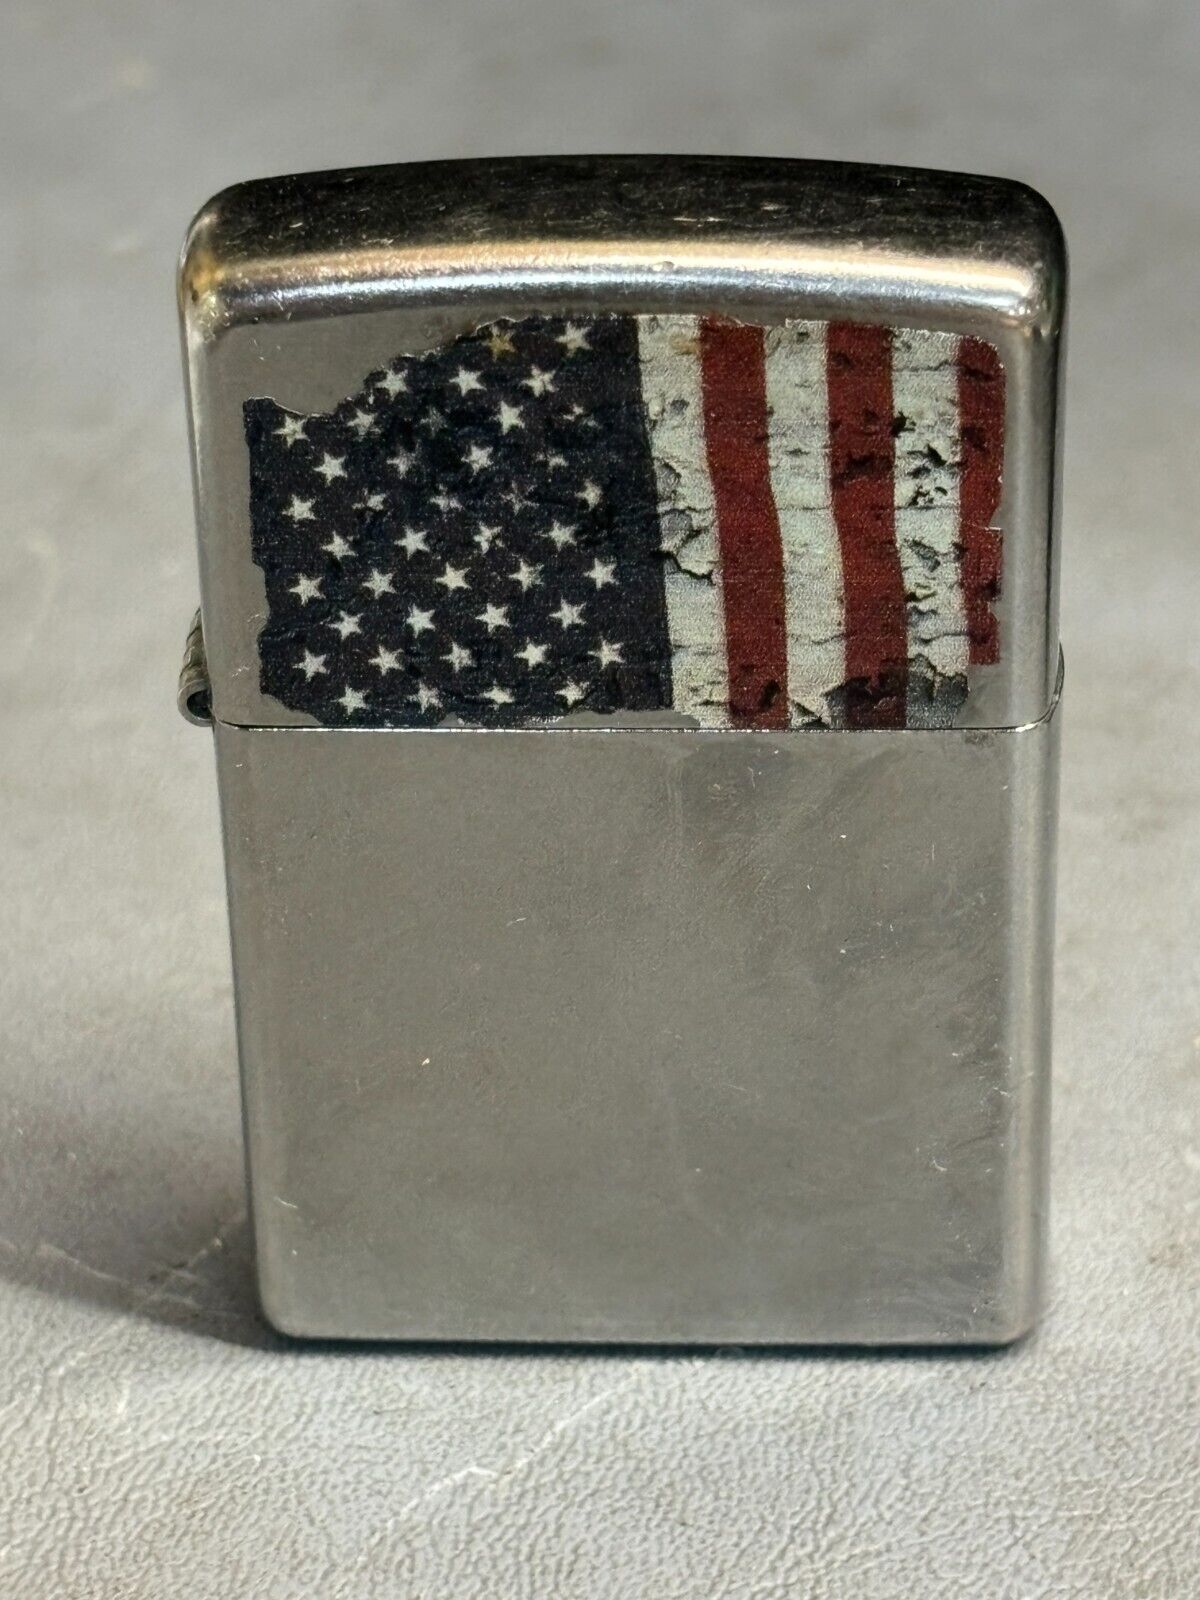 2015 Zippo Chrome Lighter - American Flag Distressed - Preowned - Fired